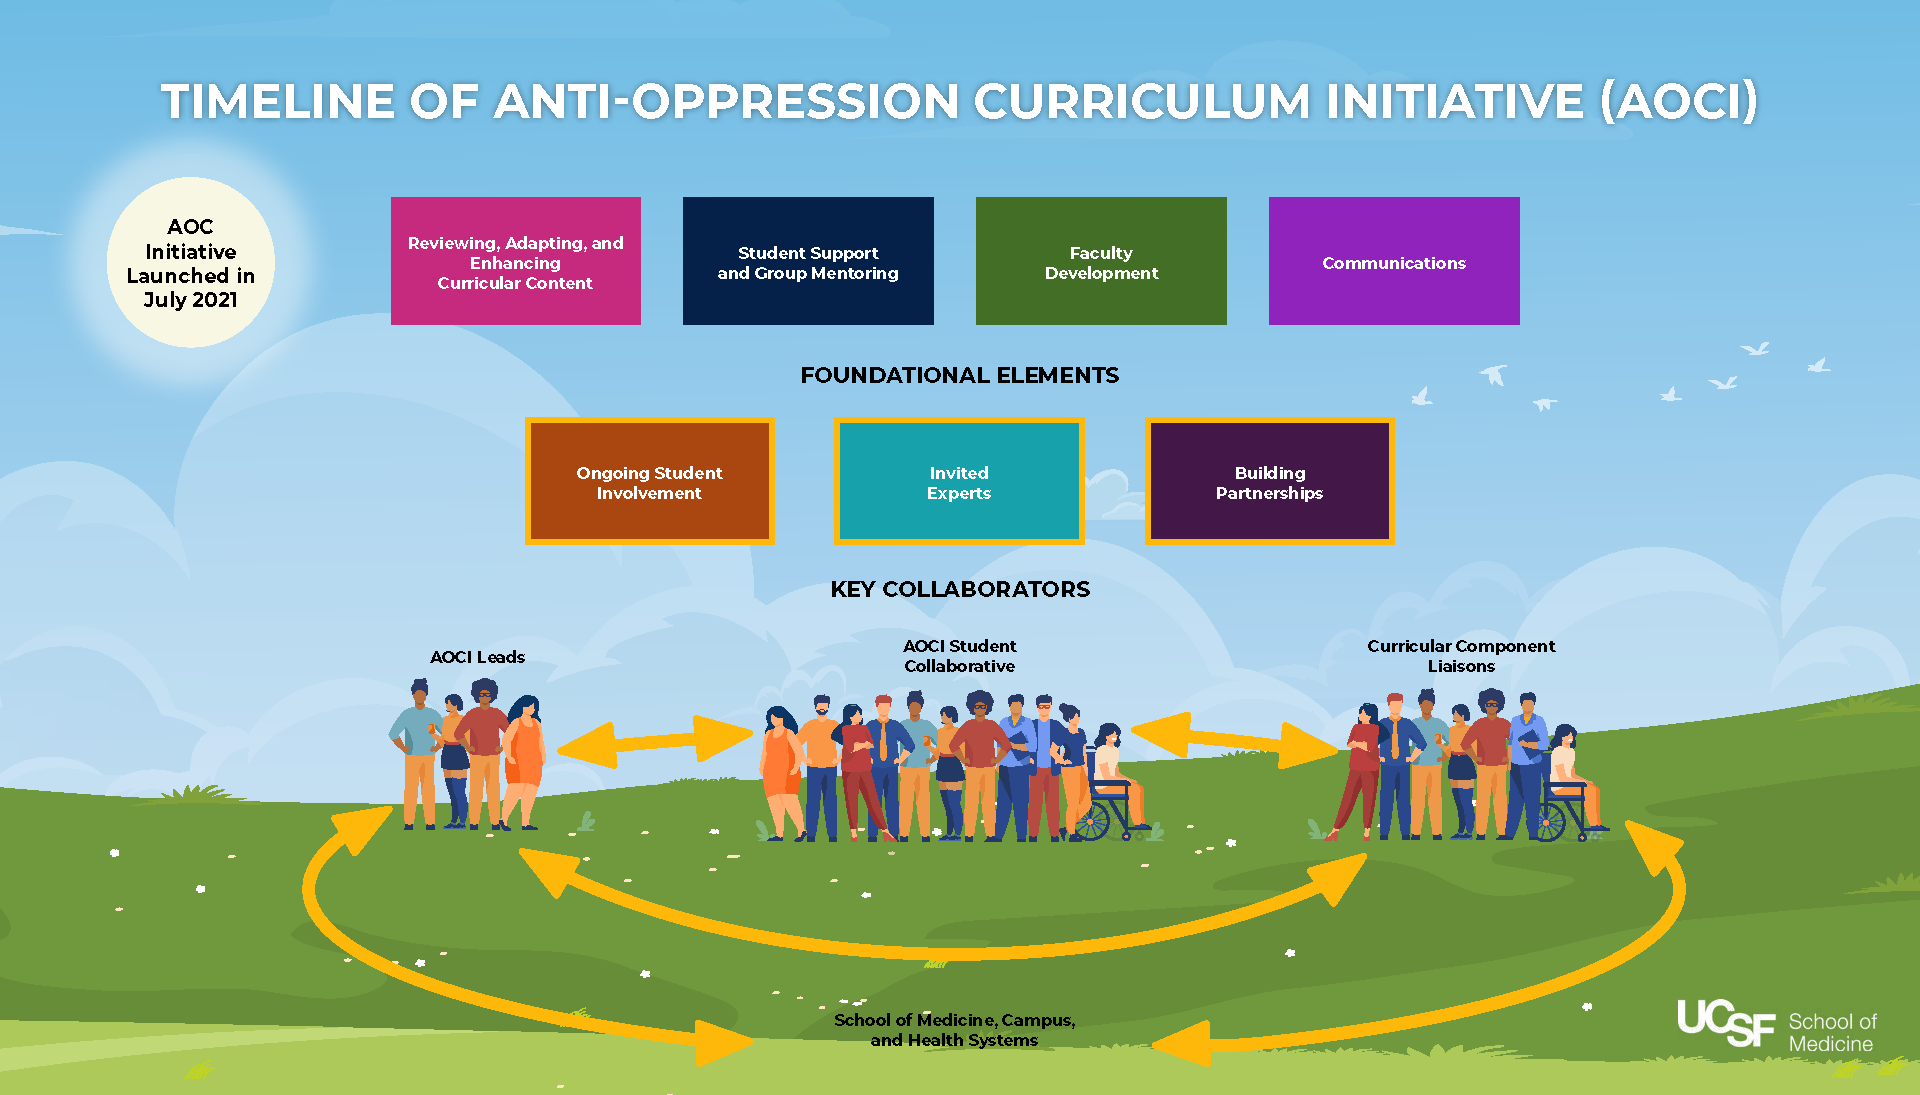 Graphic with green grass and blue sky titled, Timeline of Anti-Oppression Curriculum Initiative. Four text boxes reading Reviewing, Adapting, and Enhancing Curricular Content; Student Support and Group Mentoring; Faculty Development; Communications. Subheader reading Foundational Elements with three boxes: Ongoing Student Involvement, Invited Experts, Building Partnerships; Subheader reading Key Collaborators showing four groups connected with arrows: AOCI Leads, AOCI-Student Collaborative, Curricular Component Liaisons and School of Medicine, Campus, and Health Systems 